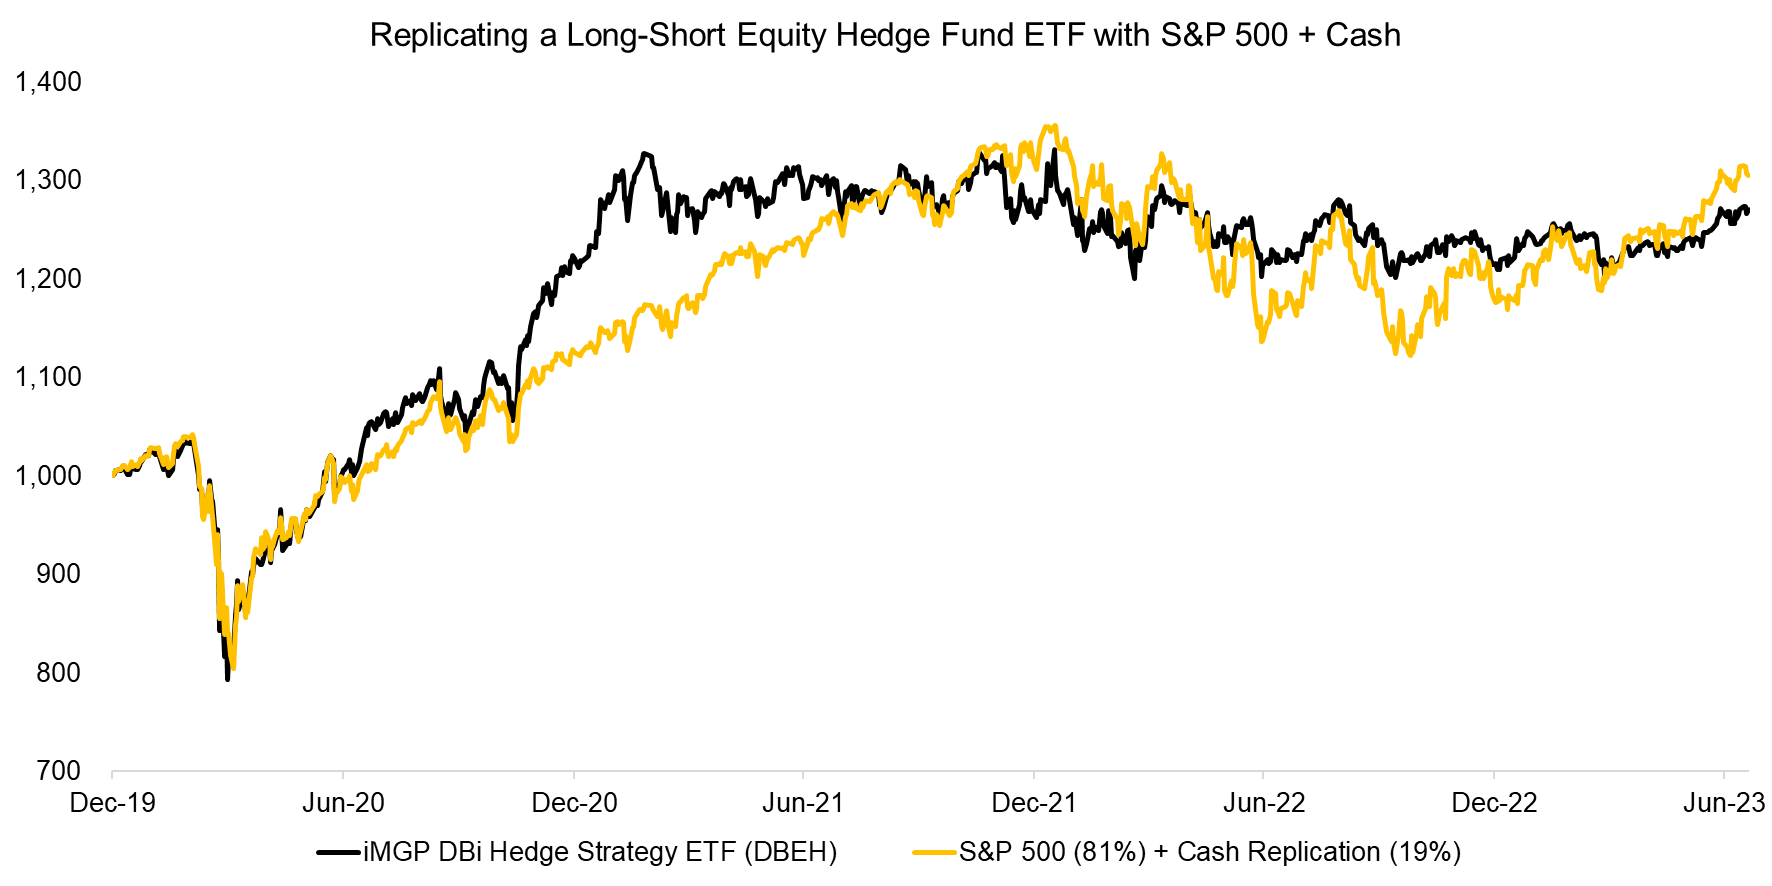 Replicating a Long-Short Equity Hedge Fund ETF with S&P 500 + Cash